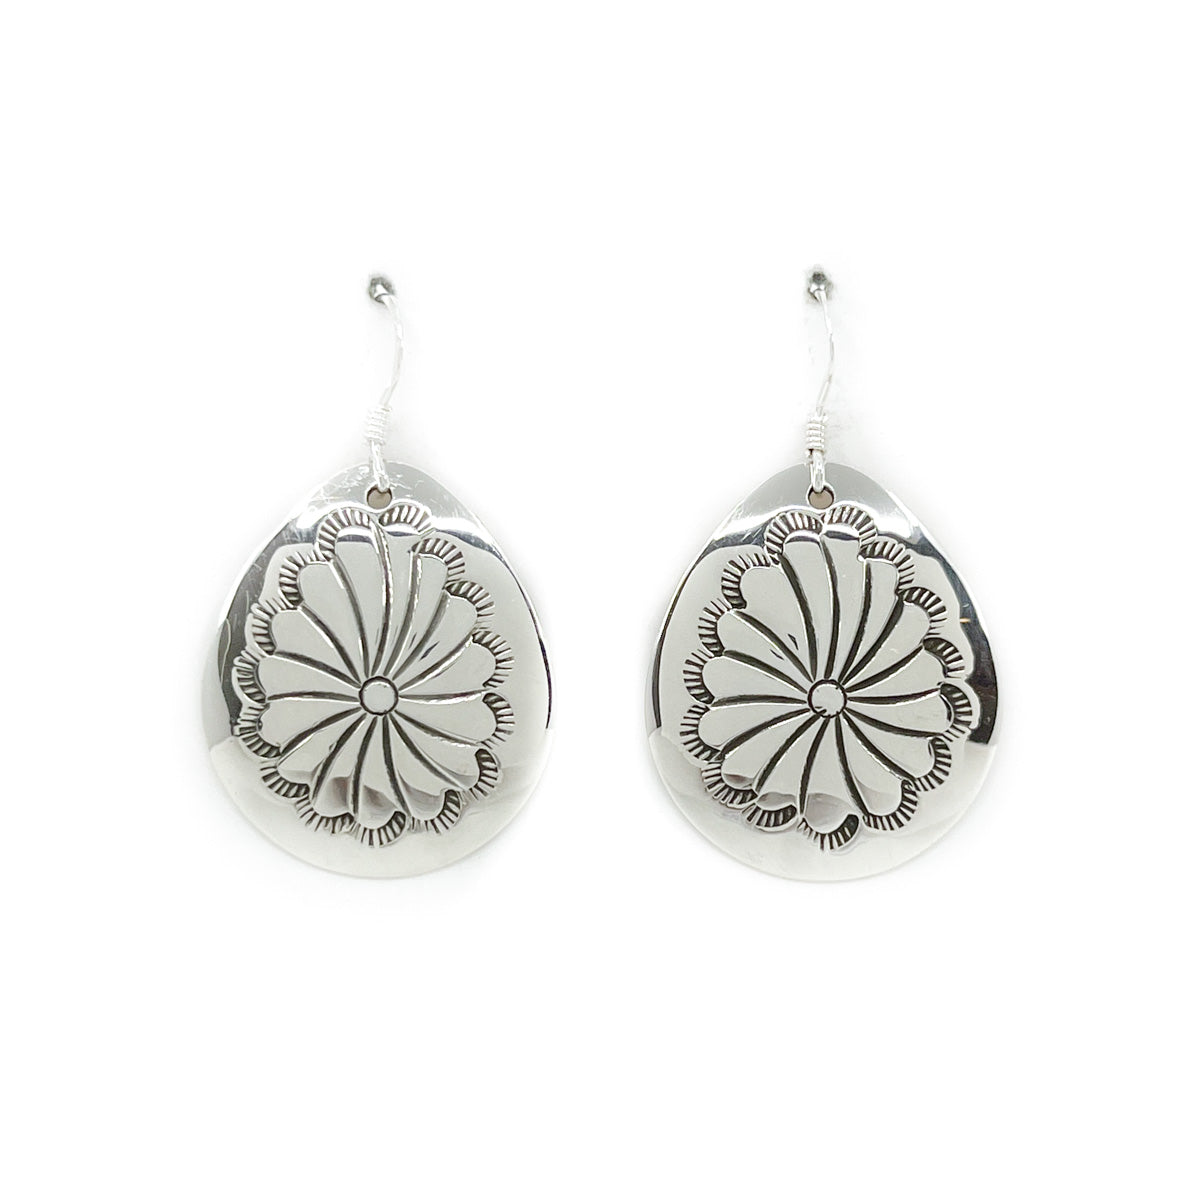 Load image into Gallery viewer, Hand stamped sterling silver drop earring with sterling silver wires By Diné silversmith, Janet Manuelito Stampwork may vary slightly with each pair Measures approximately 1 inch long by 1 inch wide, dangles 1.5 inches from earlobe *All sales on jewelry are final. No returns or exchanges.
